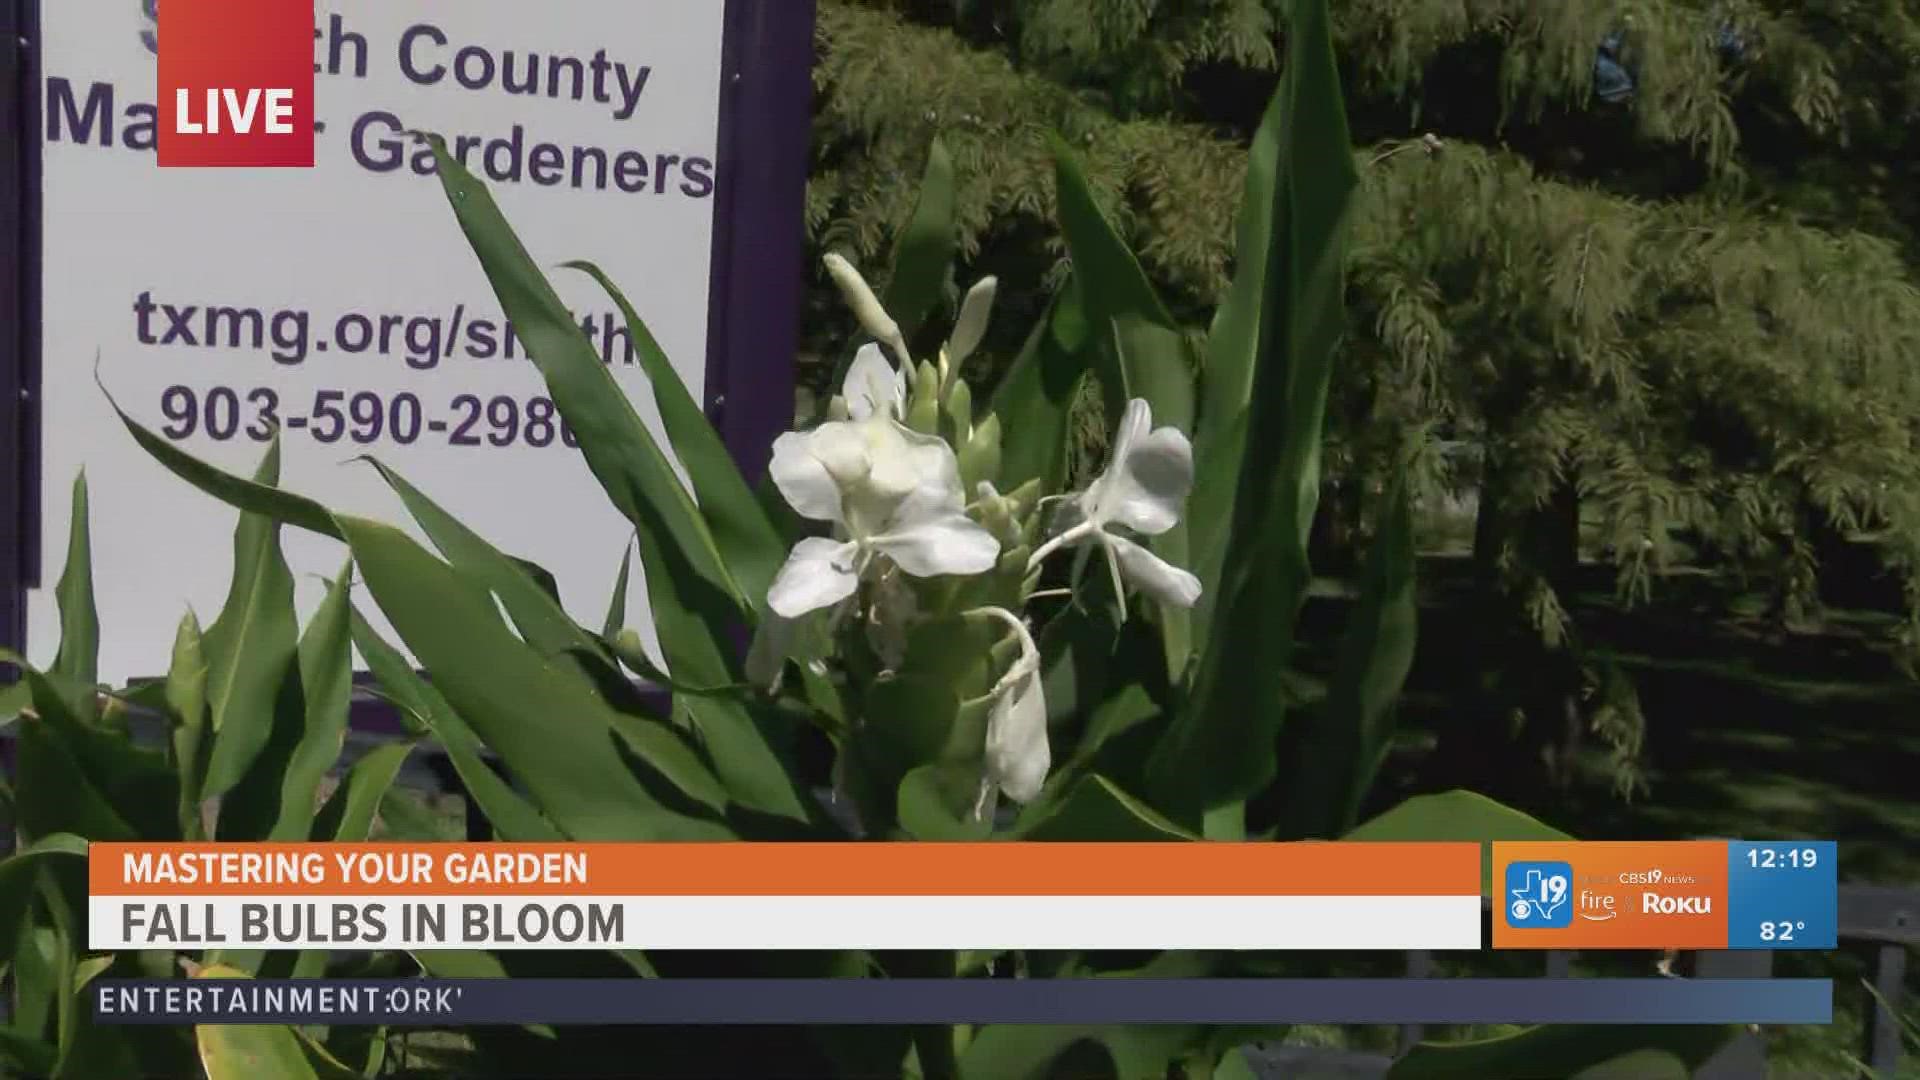 In this weeks Mastering your Garden series, we explore Southern bulbs that are known to thrive through East Texas' weather swings